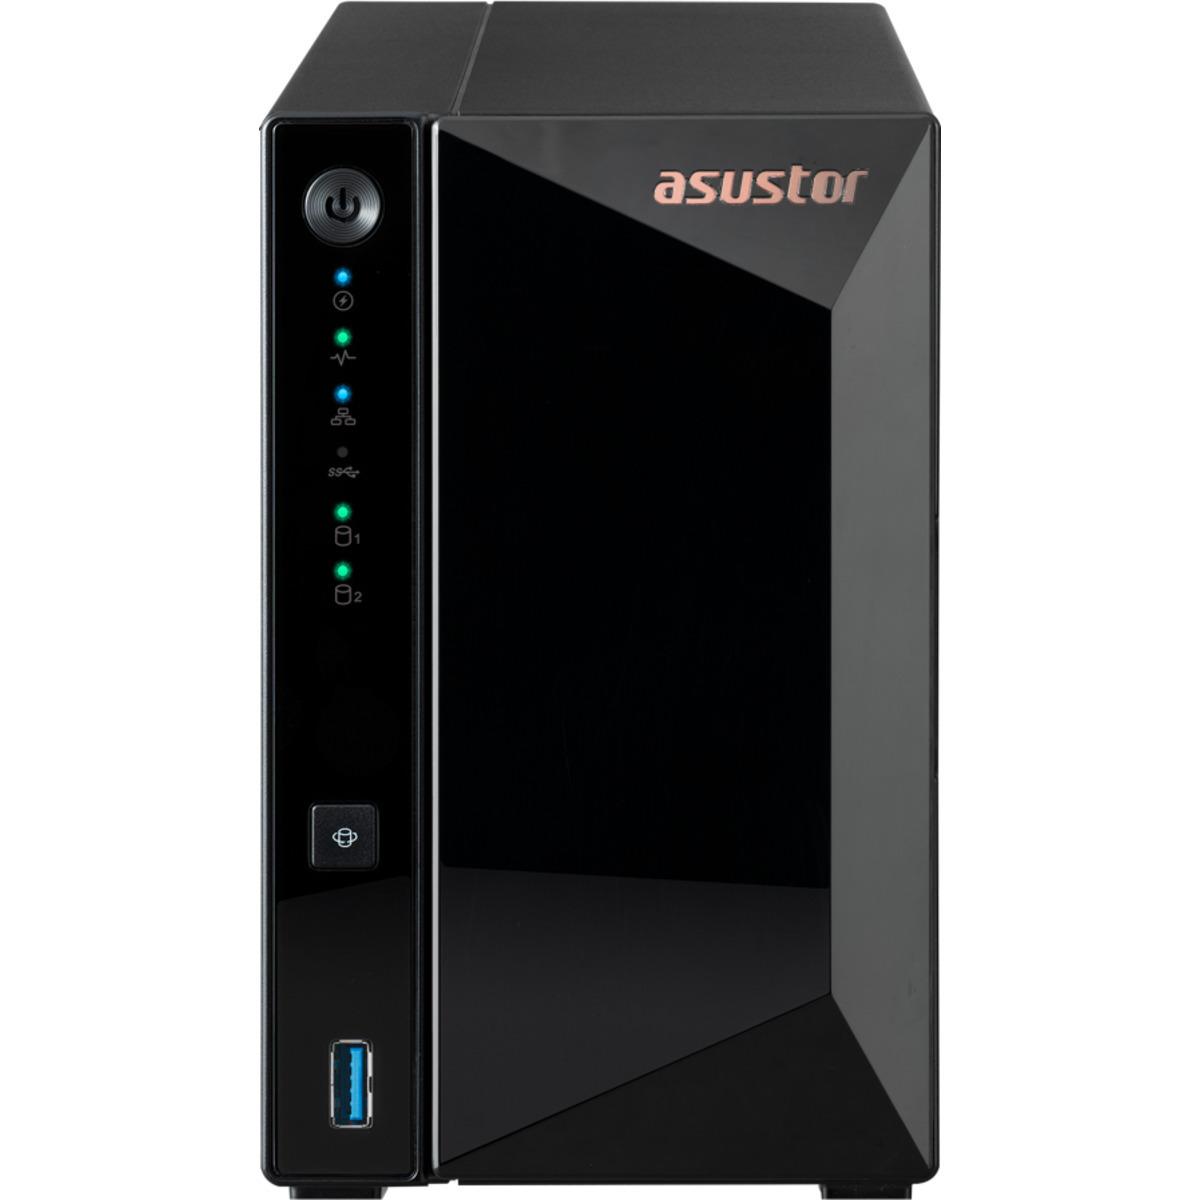 ASUSTOR DRIVESTOR 2 Pro AS3302T 36tb 2-Bay Desktop Personal / Basic Home / Small Office NAS - Network Attached Storage Device 2x18tb Seagate IronWolf Pro ST18000NT001 3.5 7200rpm SATA 6Gb/s HDD NAS Class Drives Installed - Burn-In Tested DRIVESTOR 2 Pro AS3302T